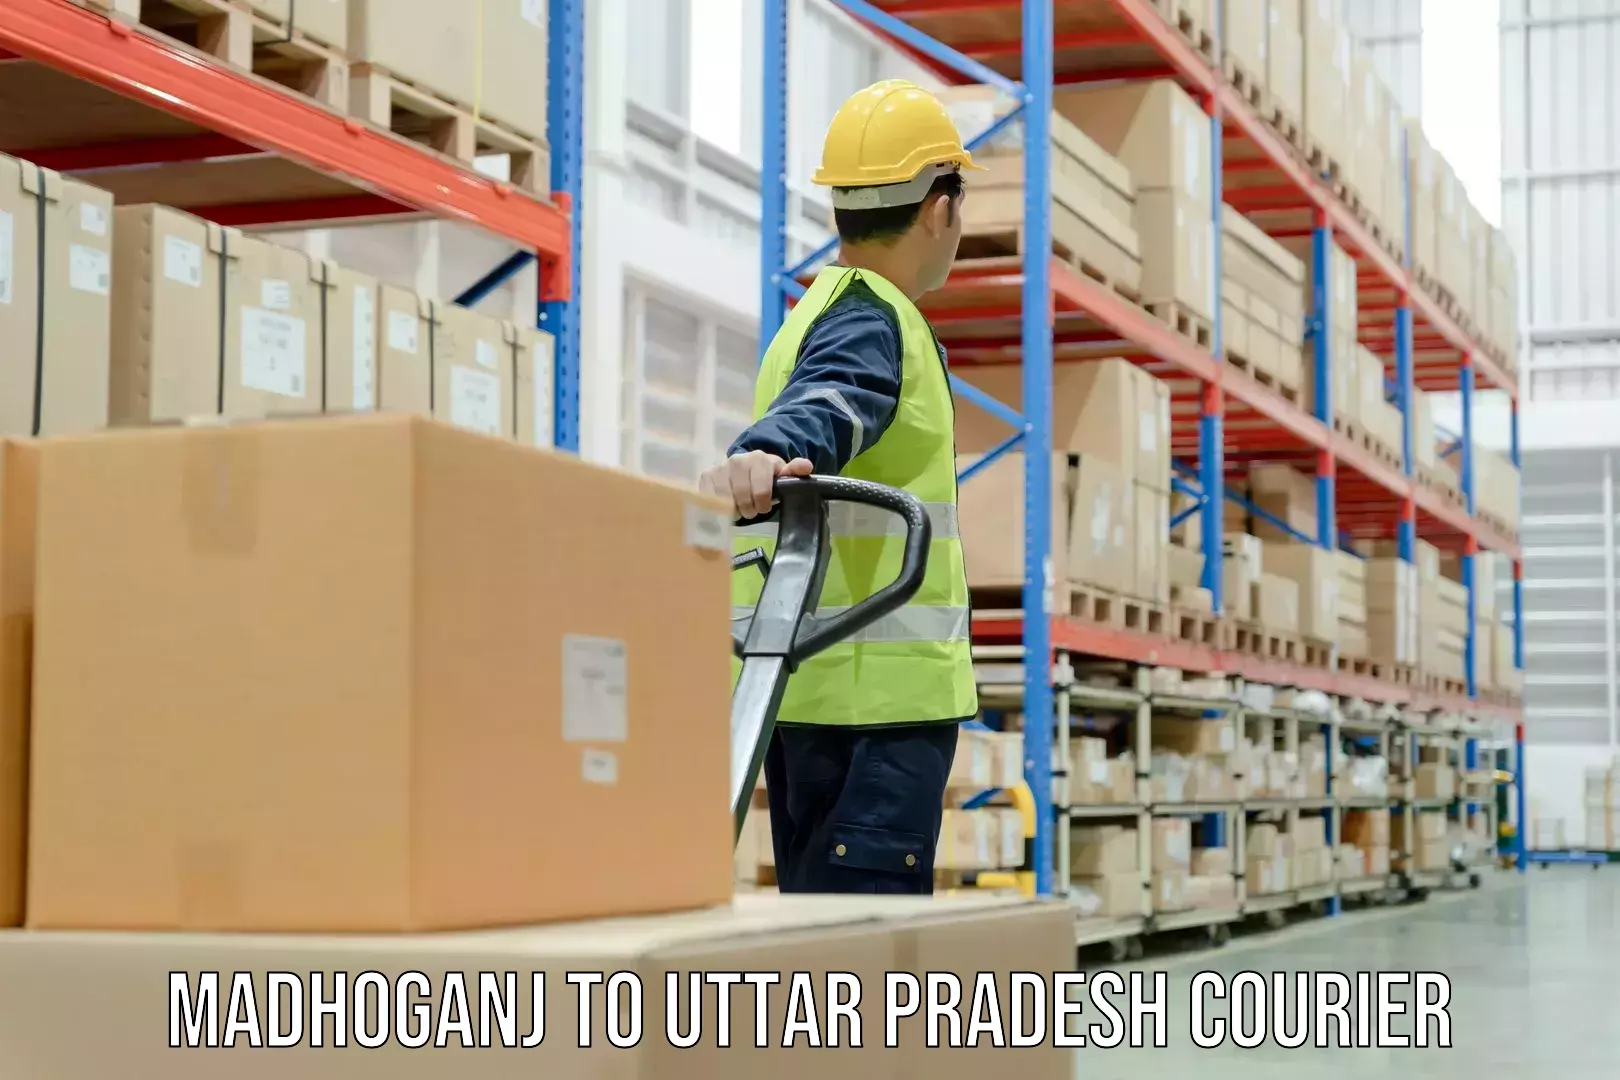 Easy access courier services Madhoganj to Sambhal